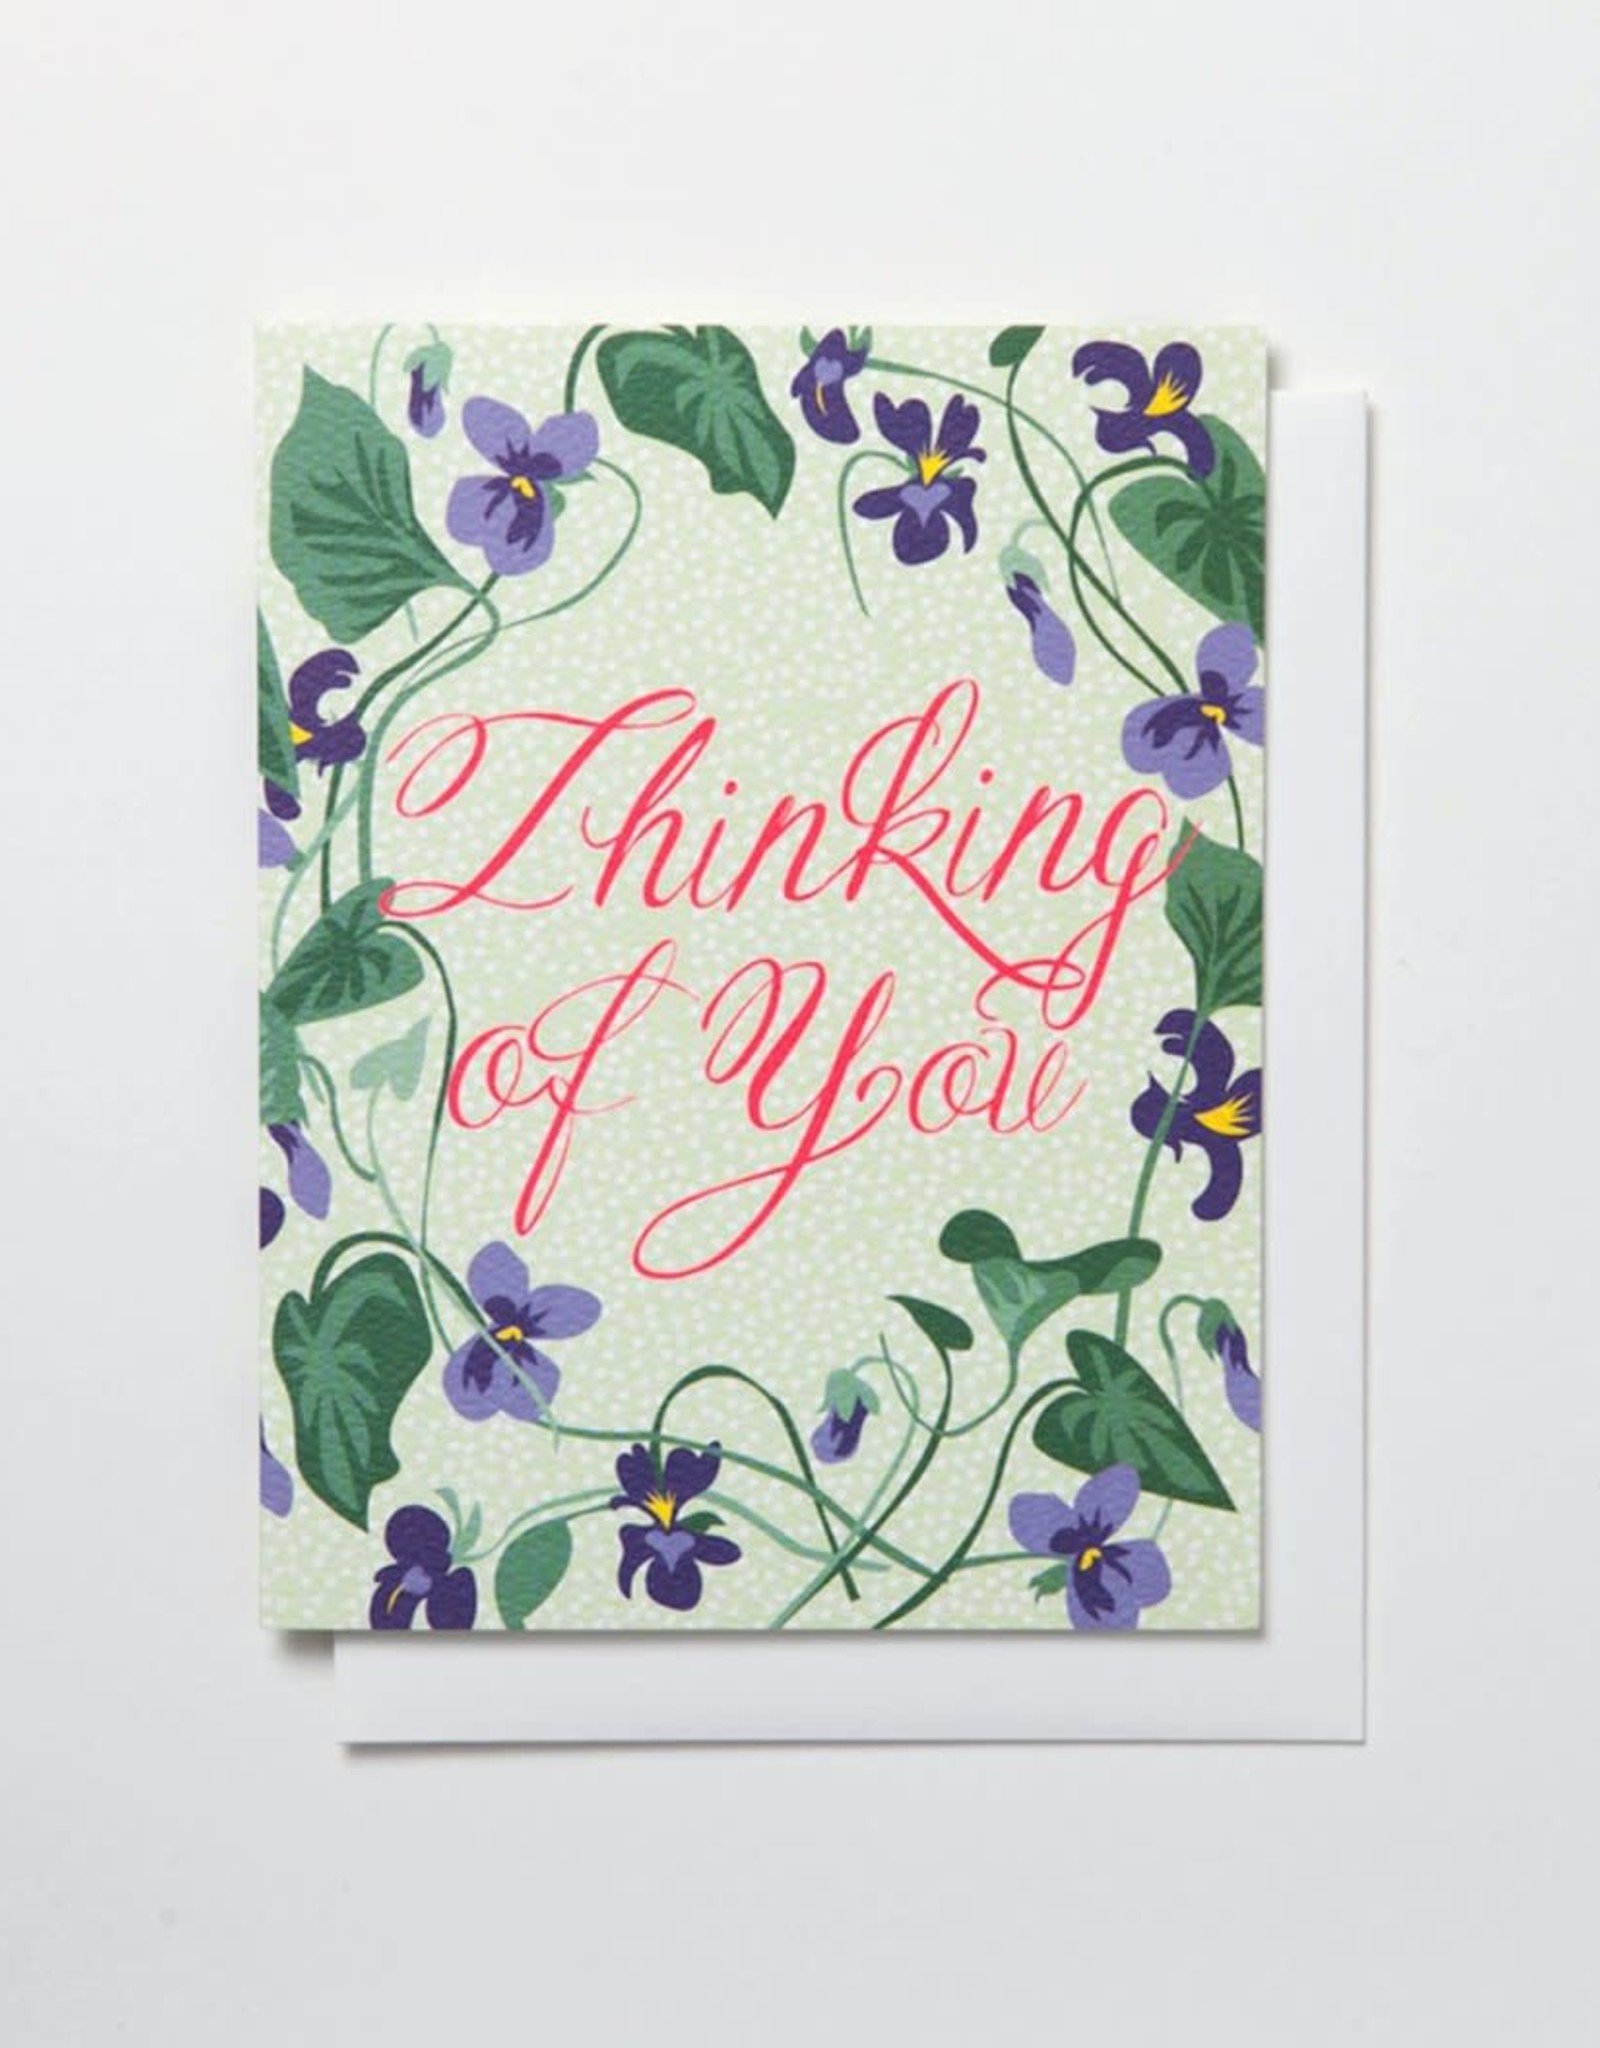 Banquet Atelier & Workshop Thinking of You Violets - Note Card